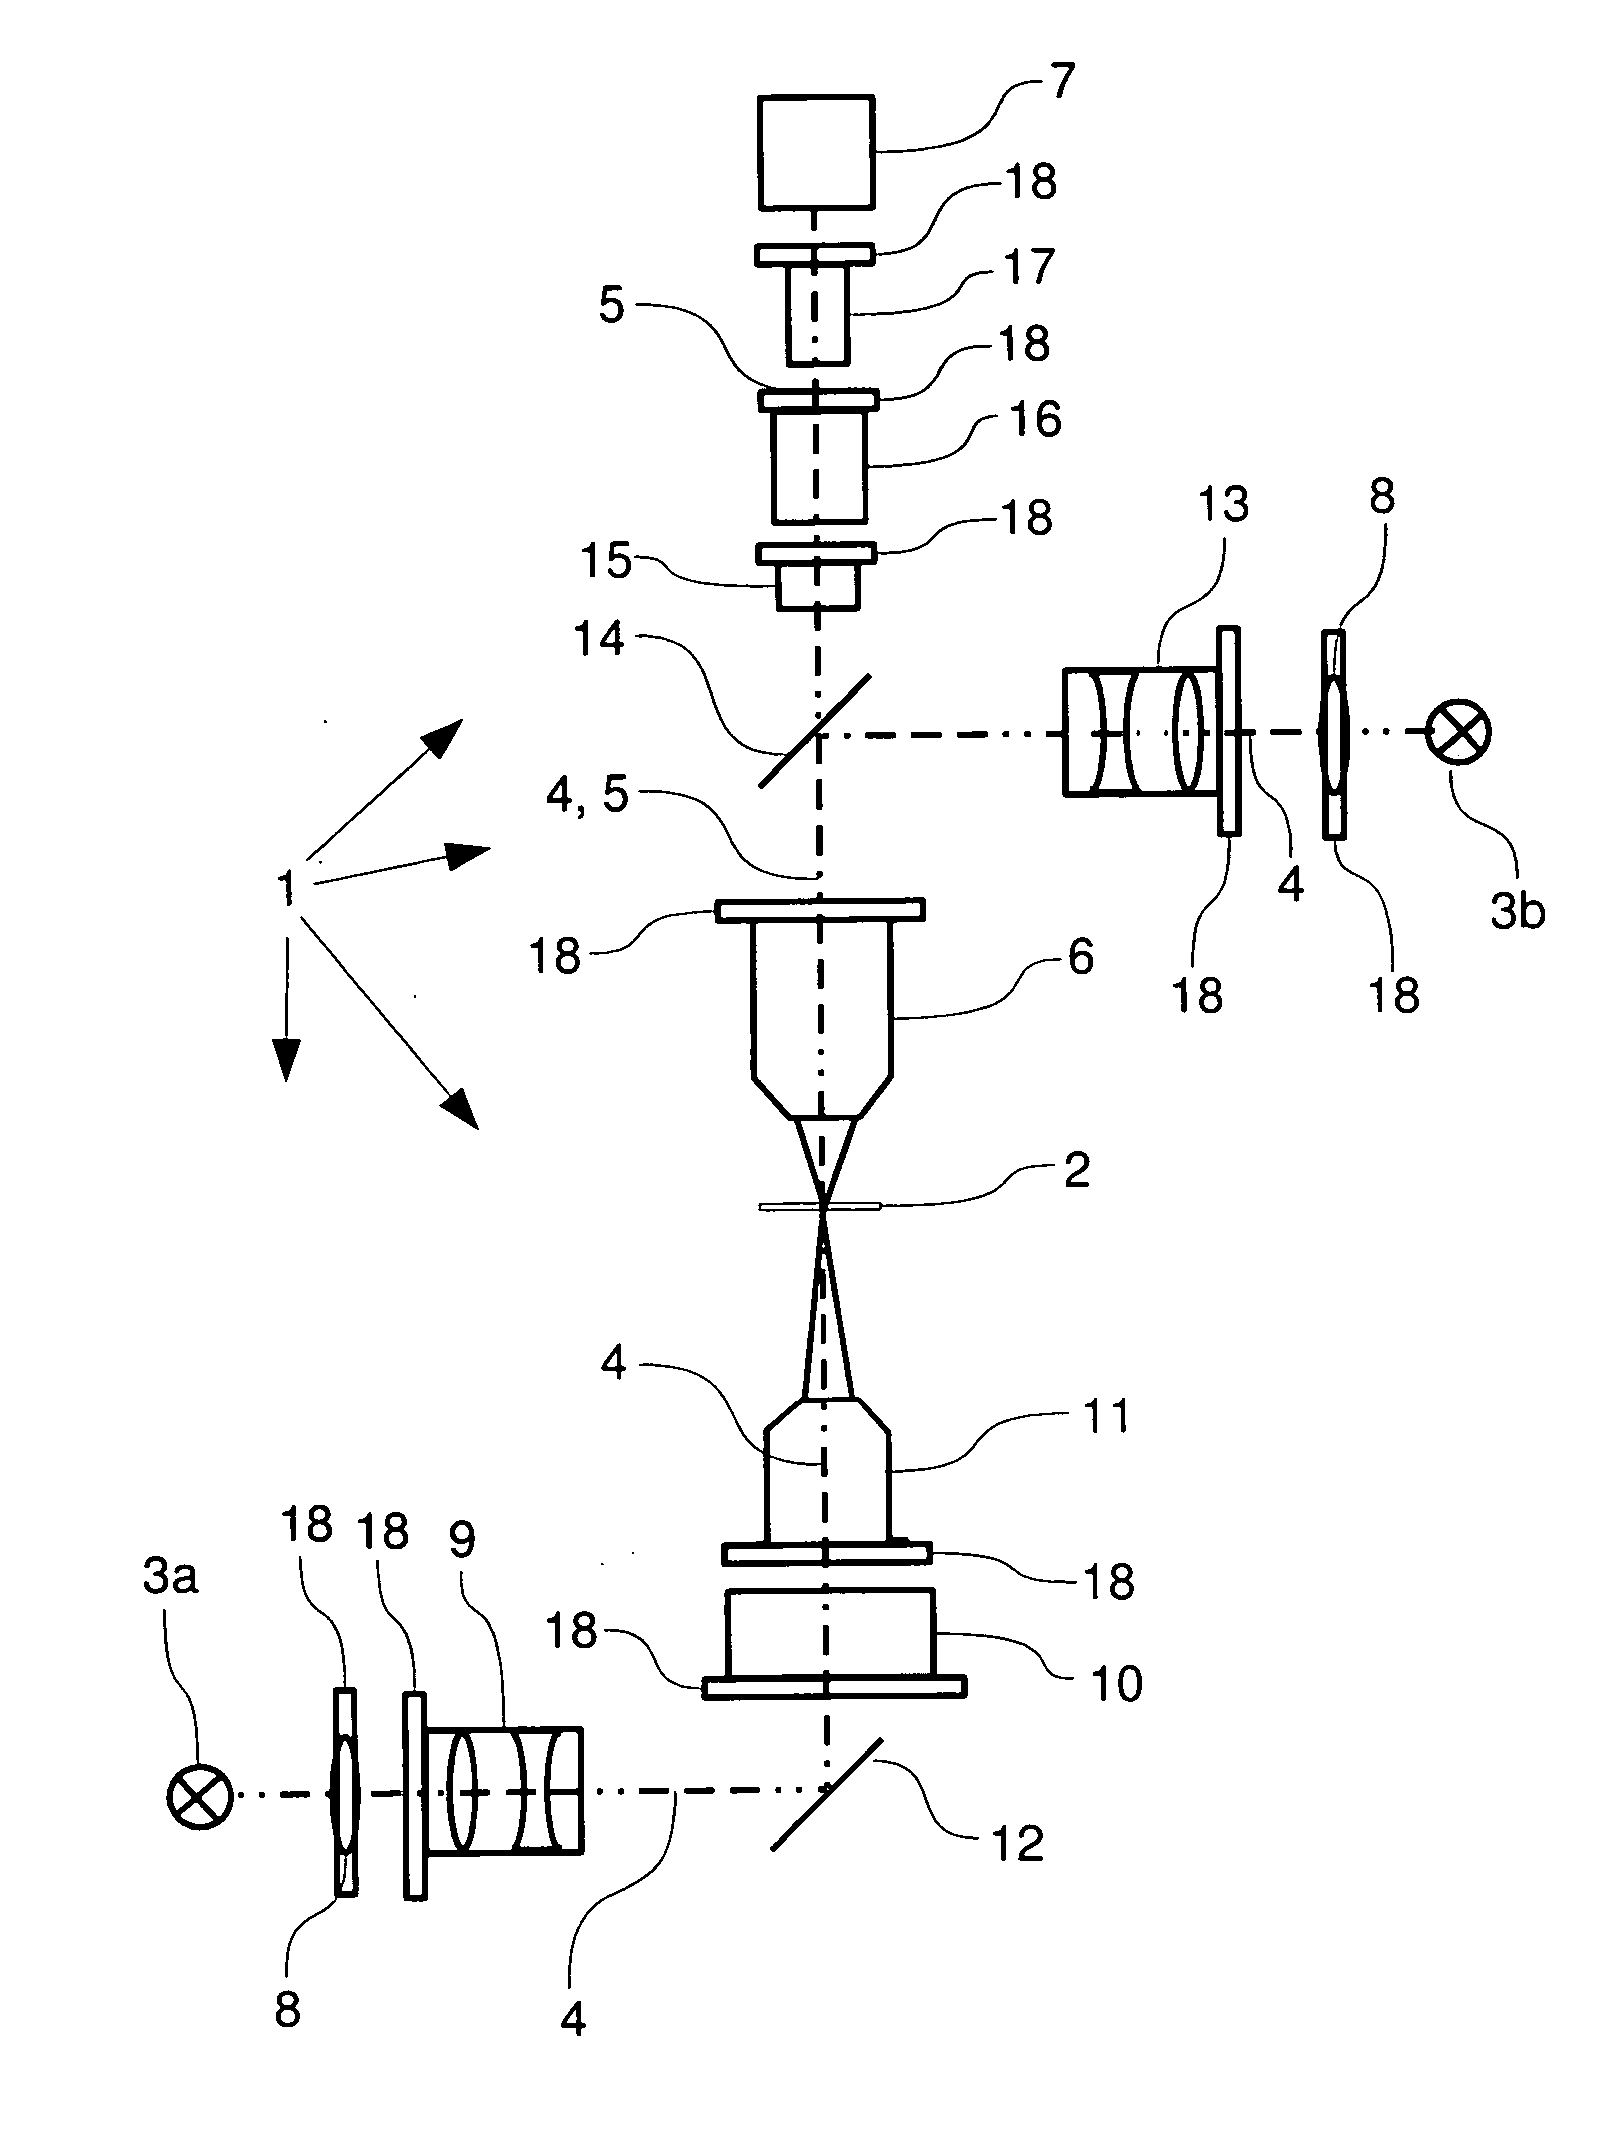 Apparatus and method for optically detecting an object